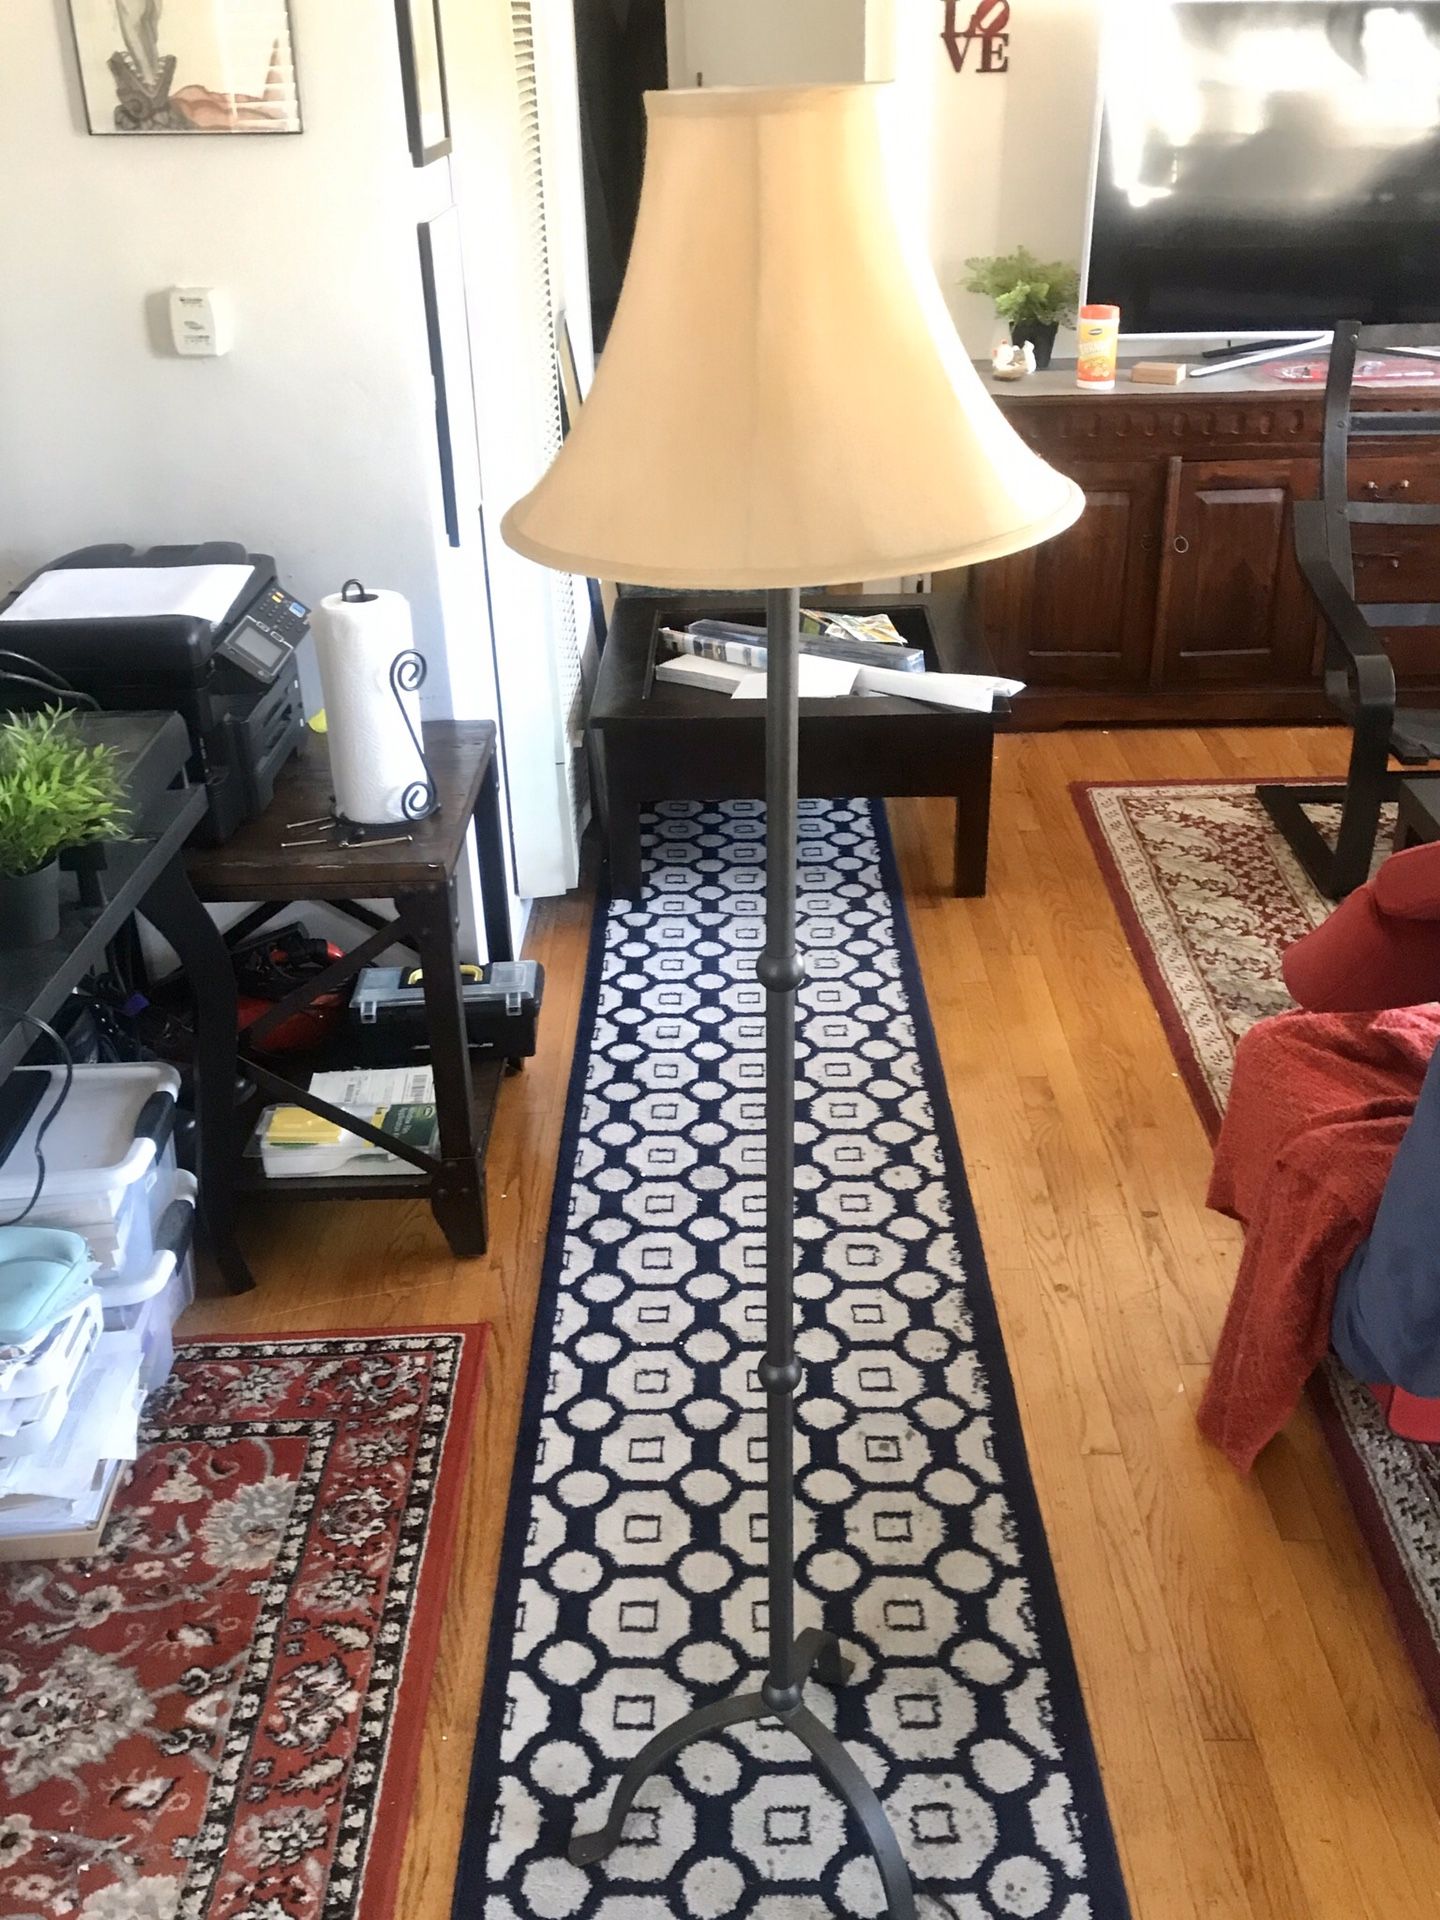 57" Black Metal Floor Lamp w. Cream Colored Shade; includes GE CFL Soft White Energy Smart Bulb, 13 Watts- 60 Watt Replacement ($5 value). $15 OBO.